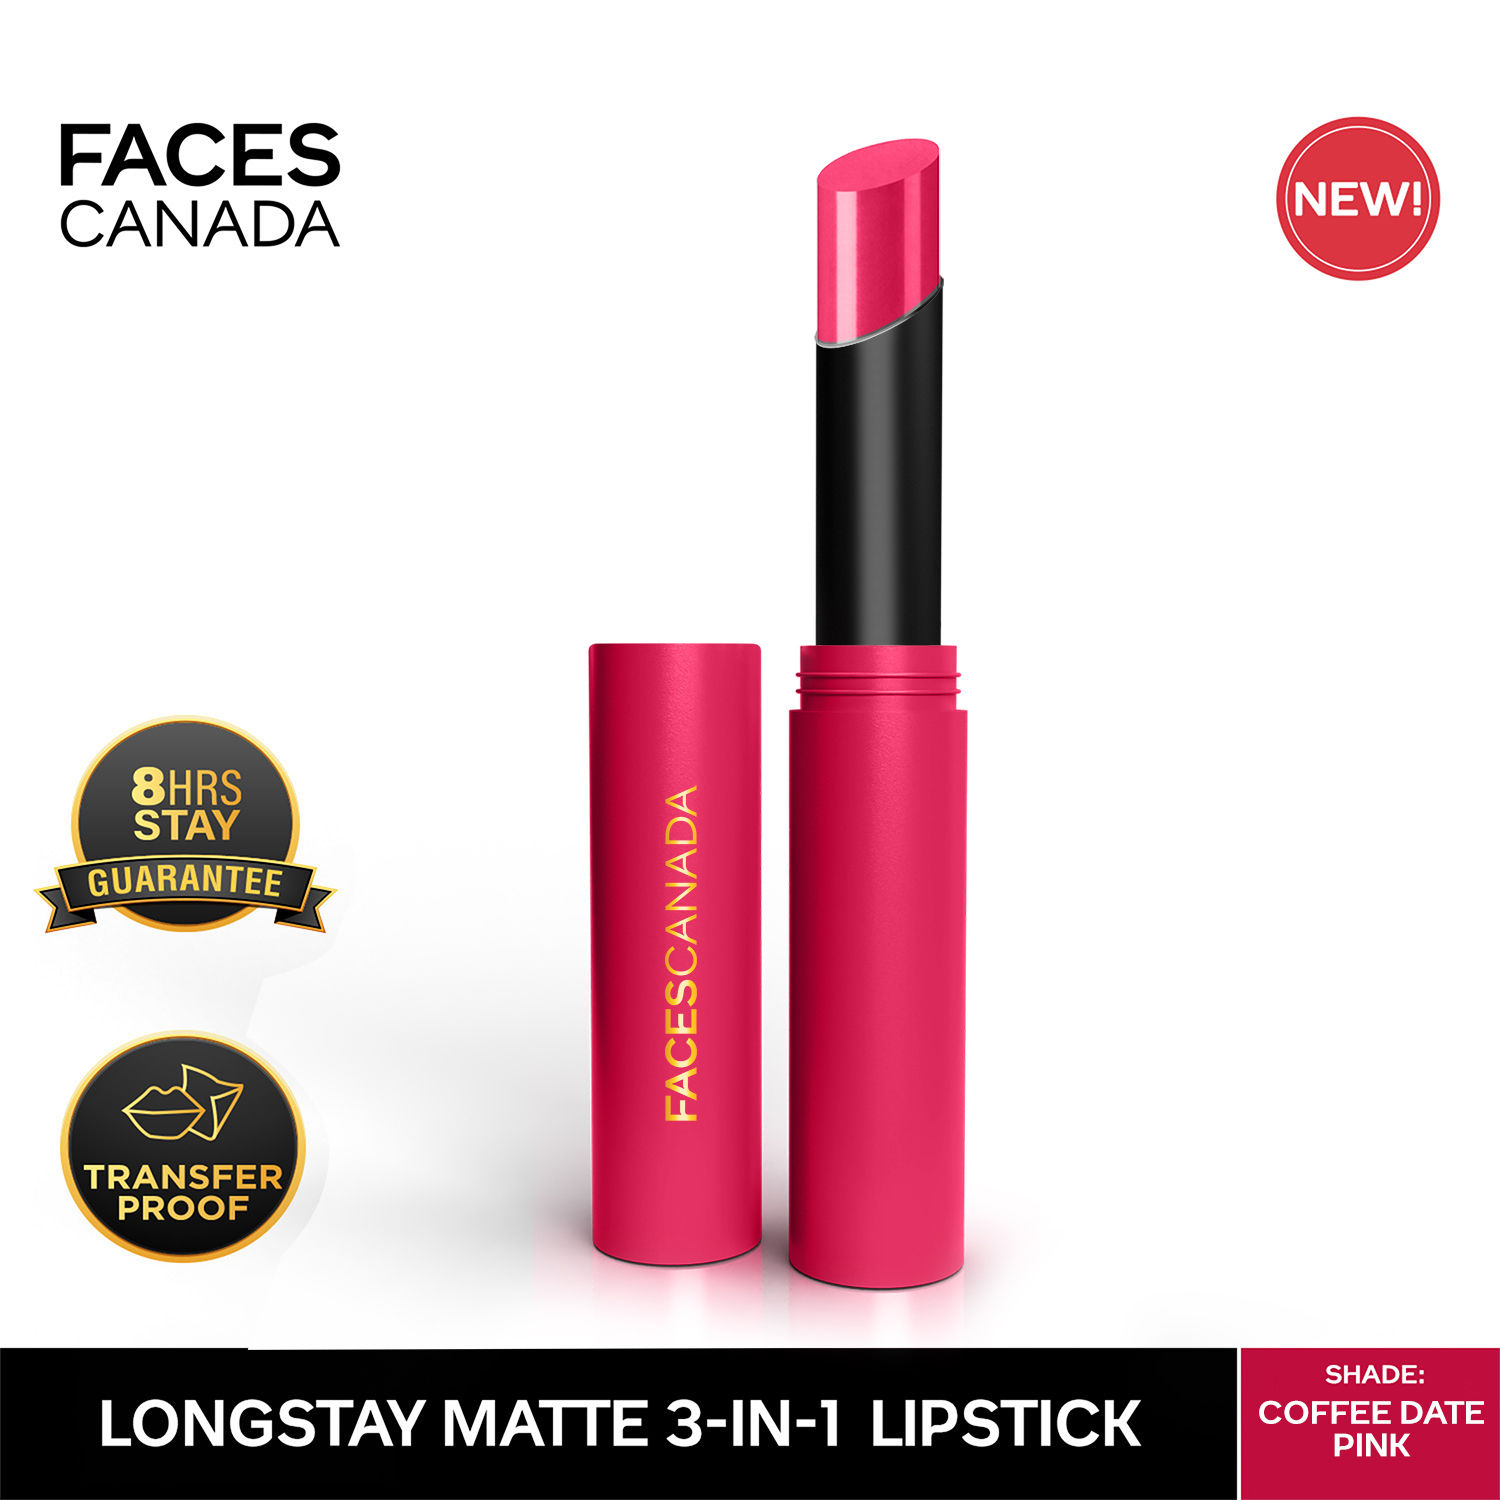 Buy FACES CANADA Long Stay 3-in-1 Matte Lipstick - Coffee Date Pink 02, 2g | 8HR Longstay | Transfer Proof | Moisturizing | Chamomile & Shea Butter | Primer-Infused | Lightweight | Intense Color Payoff - Purplle